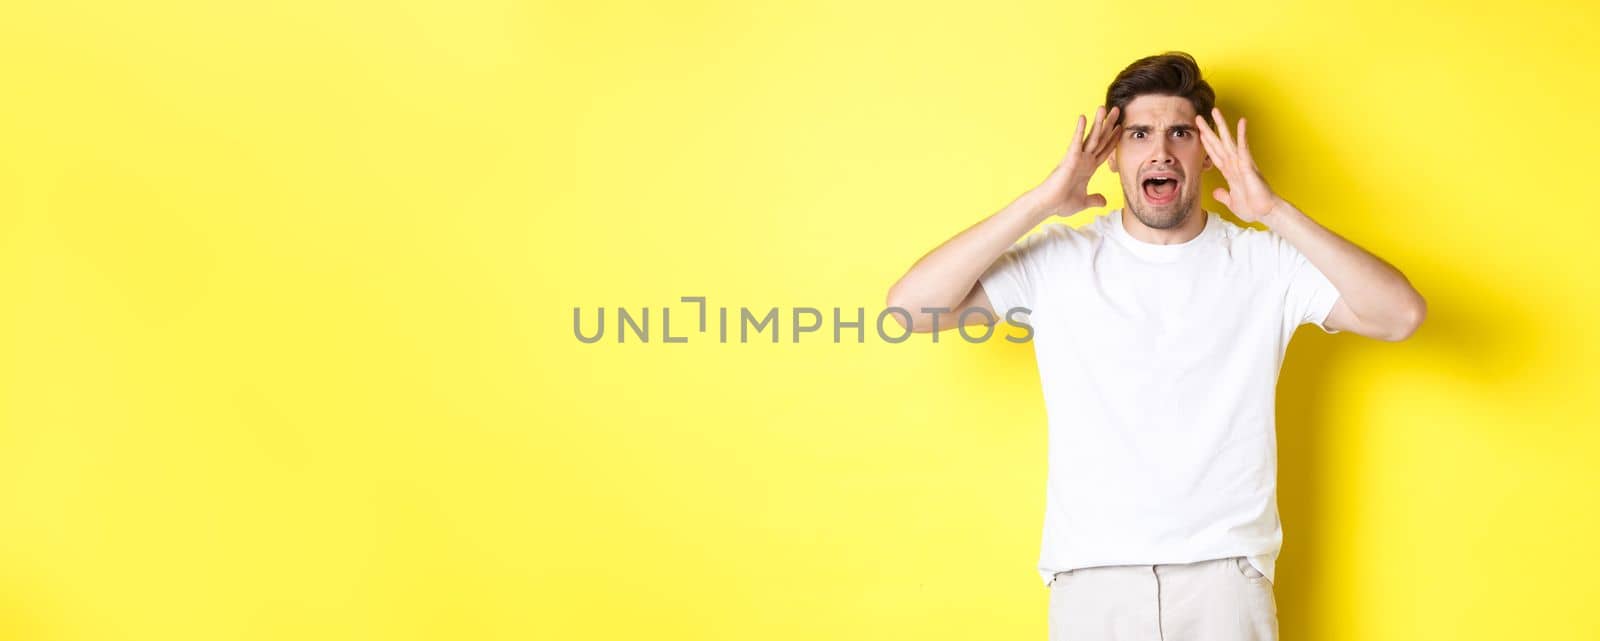 Frustrated guy looking alarmed, holding hands on head and feeling confused, panicking, standing over yellow background.